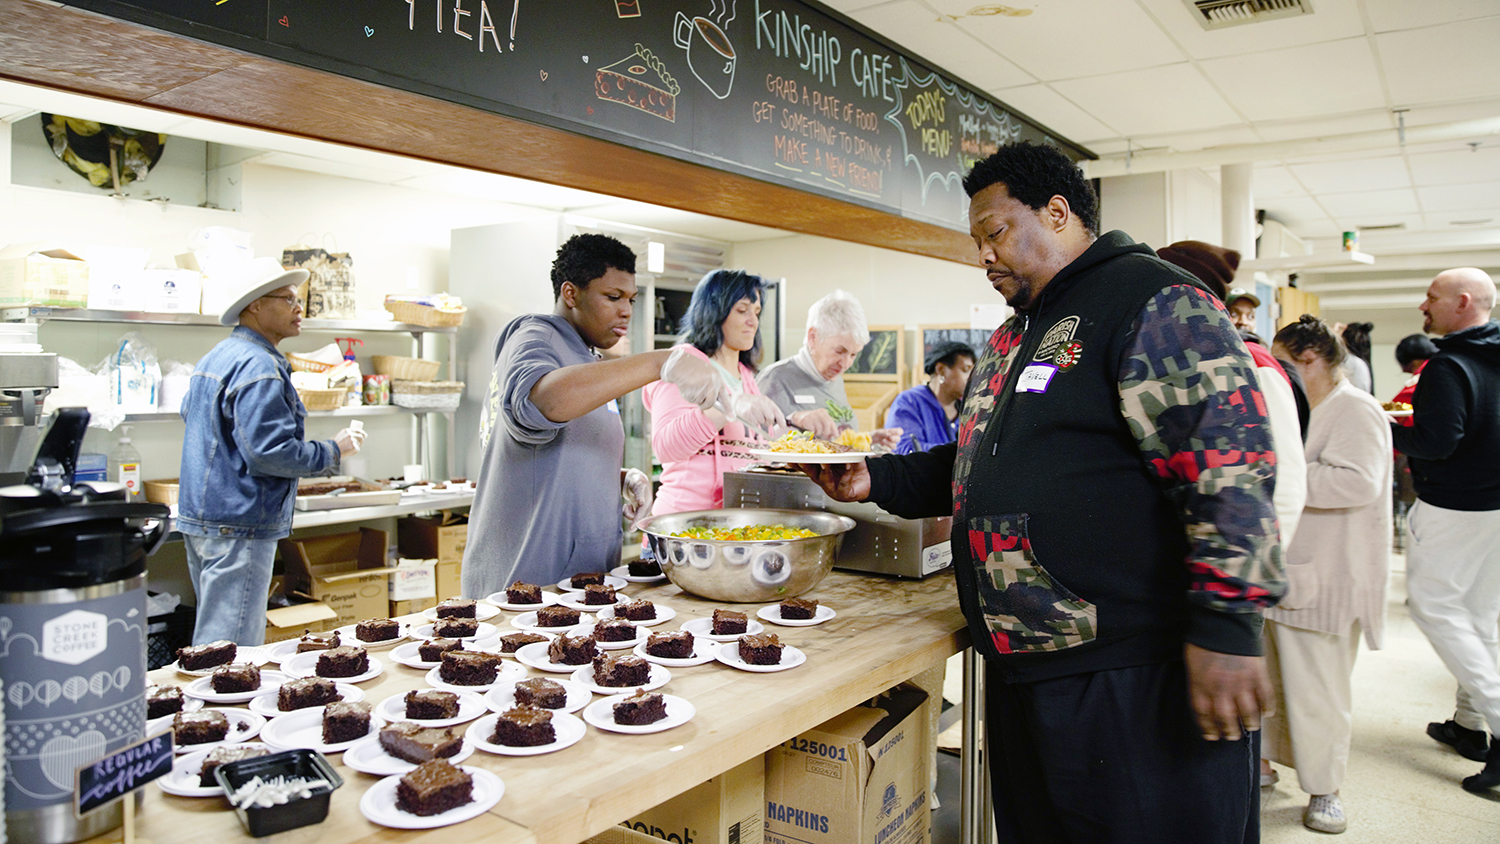 Under a blackboard with a colorful sign reading “Kinship Café,” Kinship volunteers spoon out food for community members who have lined up at a long counter that is also filled at one end with plates of pre-sliced peanut butter chocolate cake for dessert.  